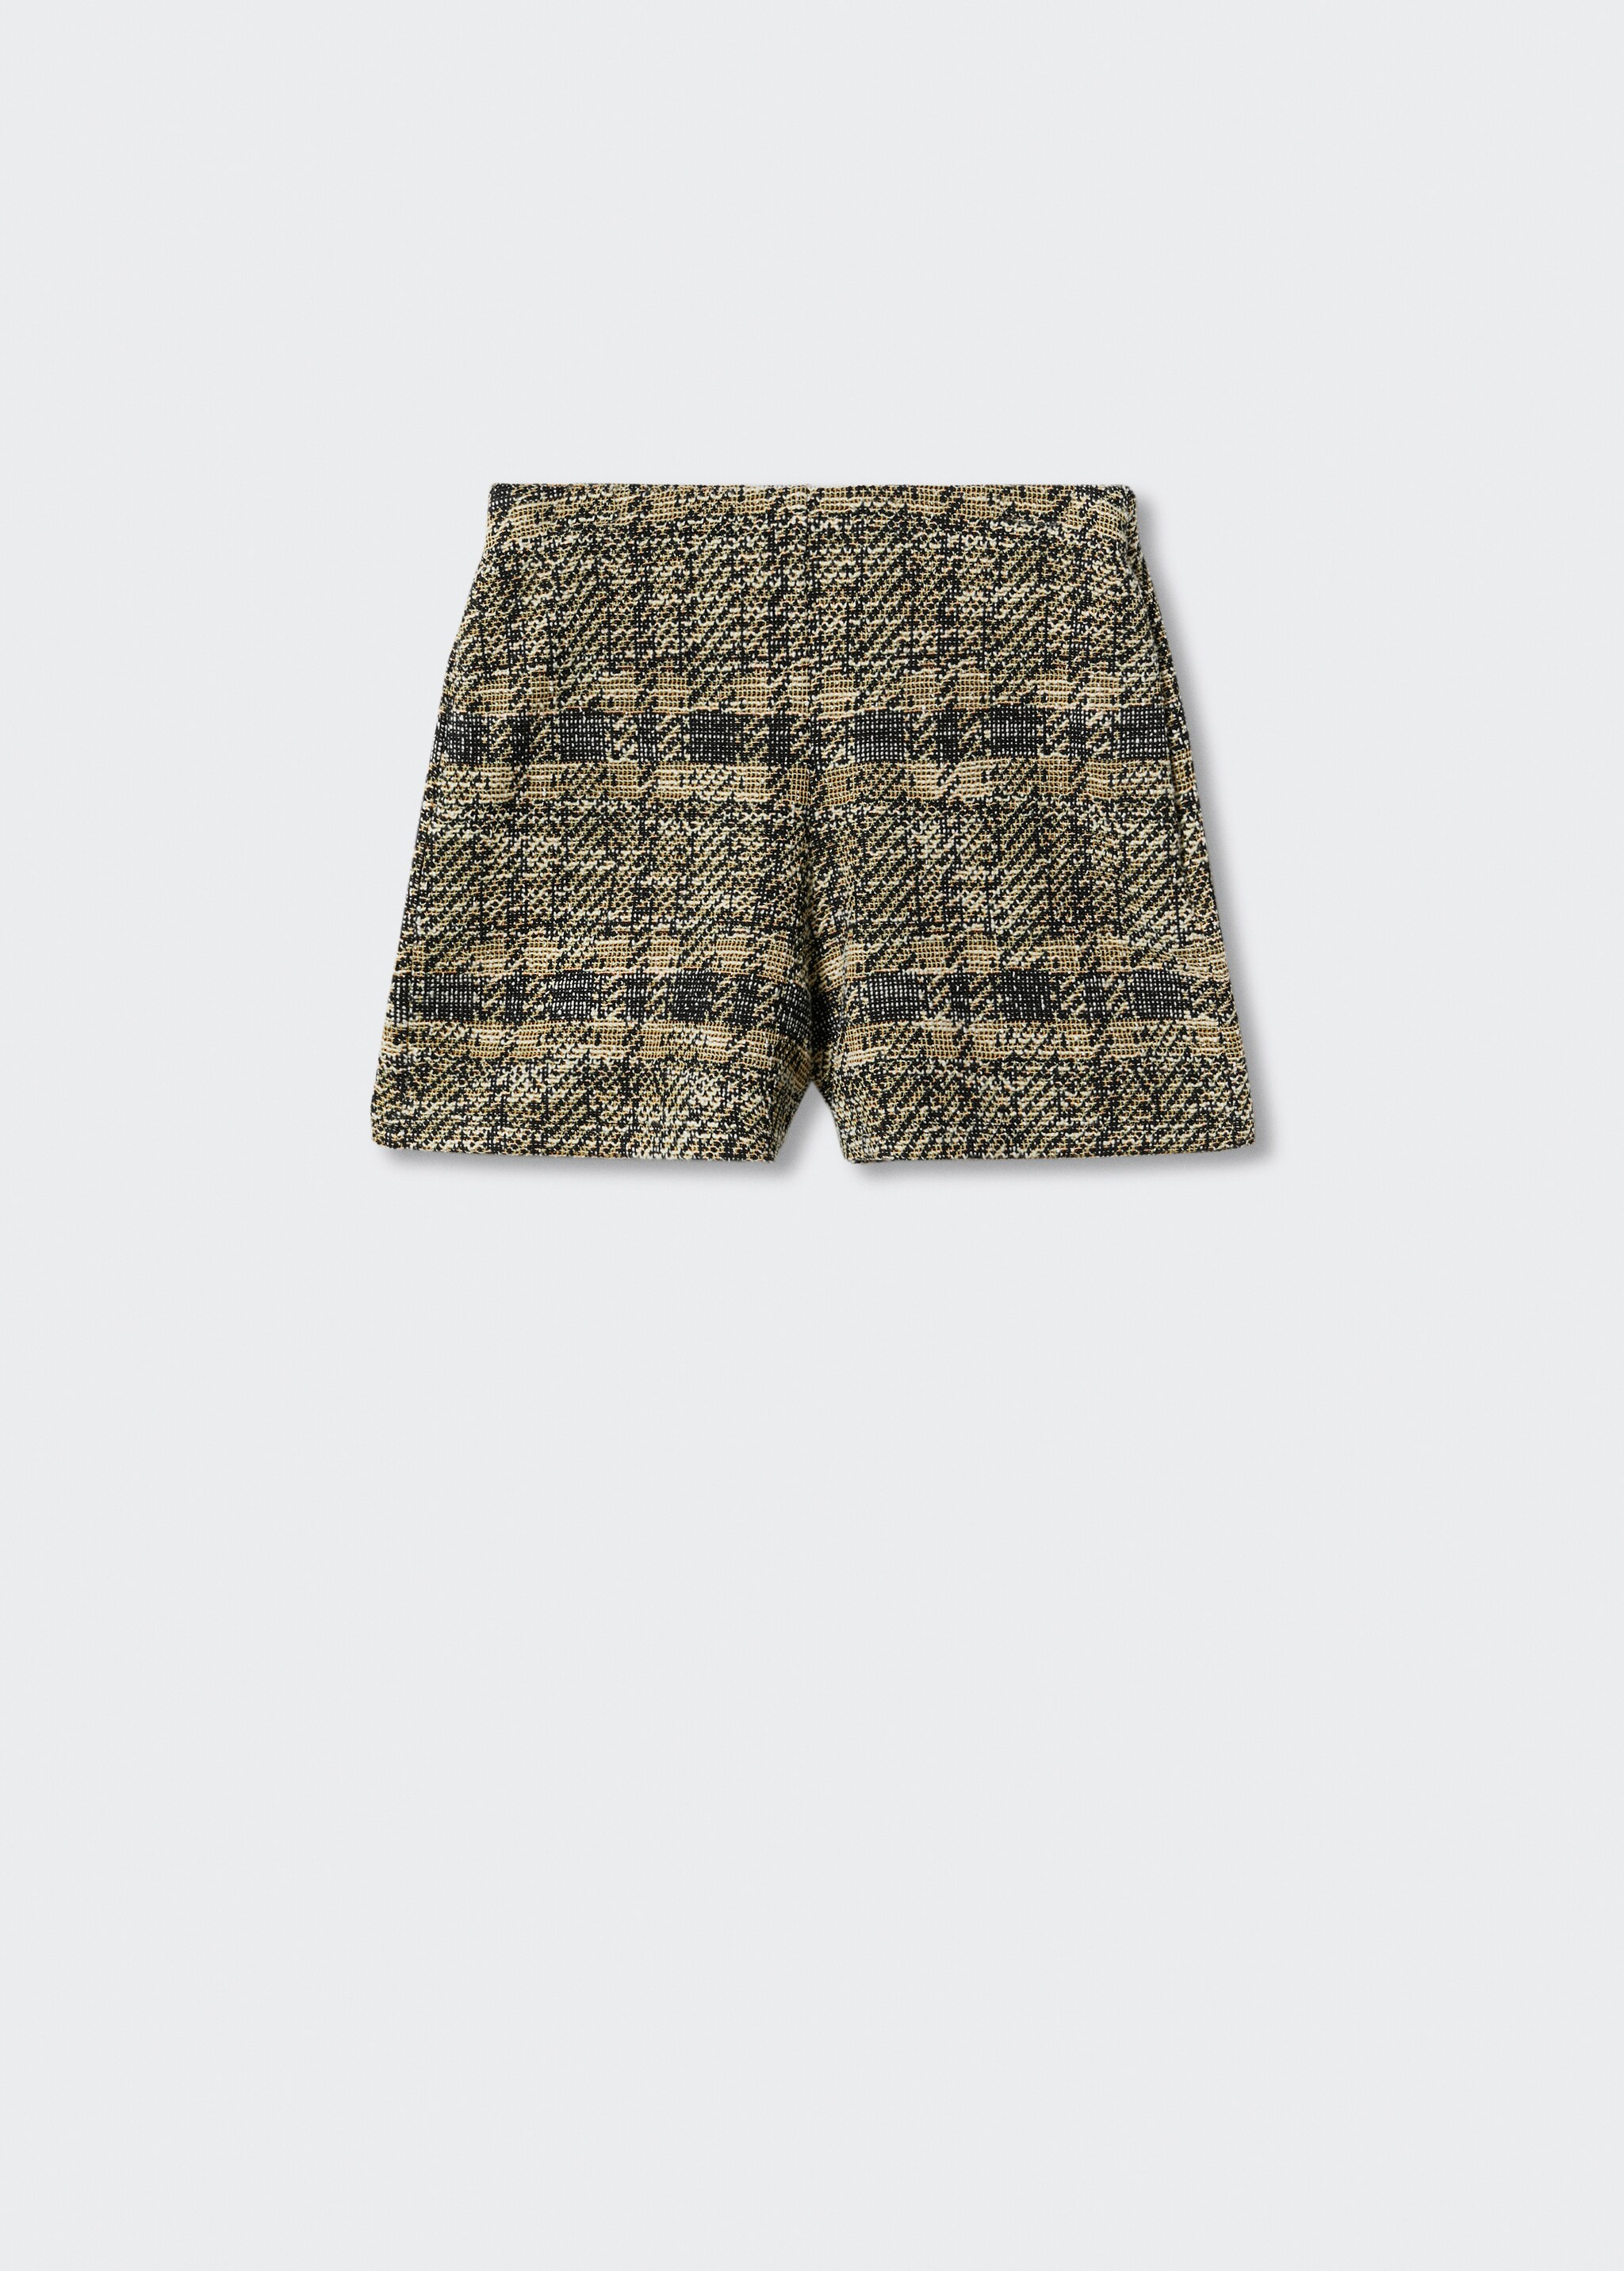 Tweed shorts - Article without model